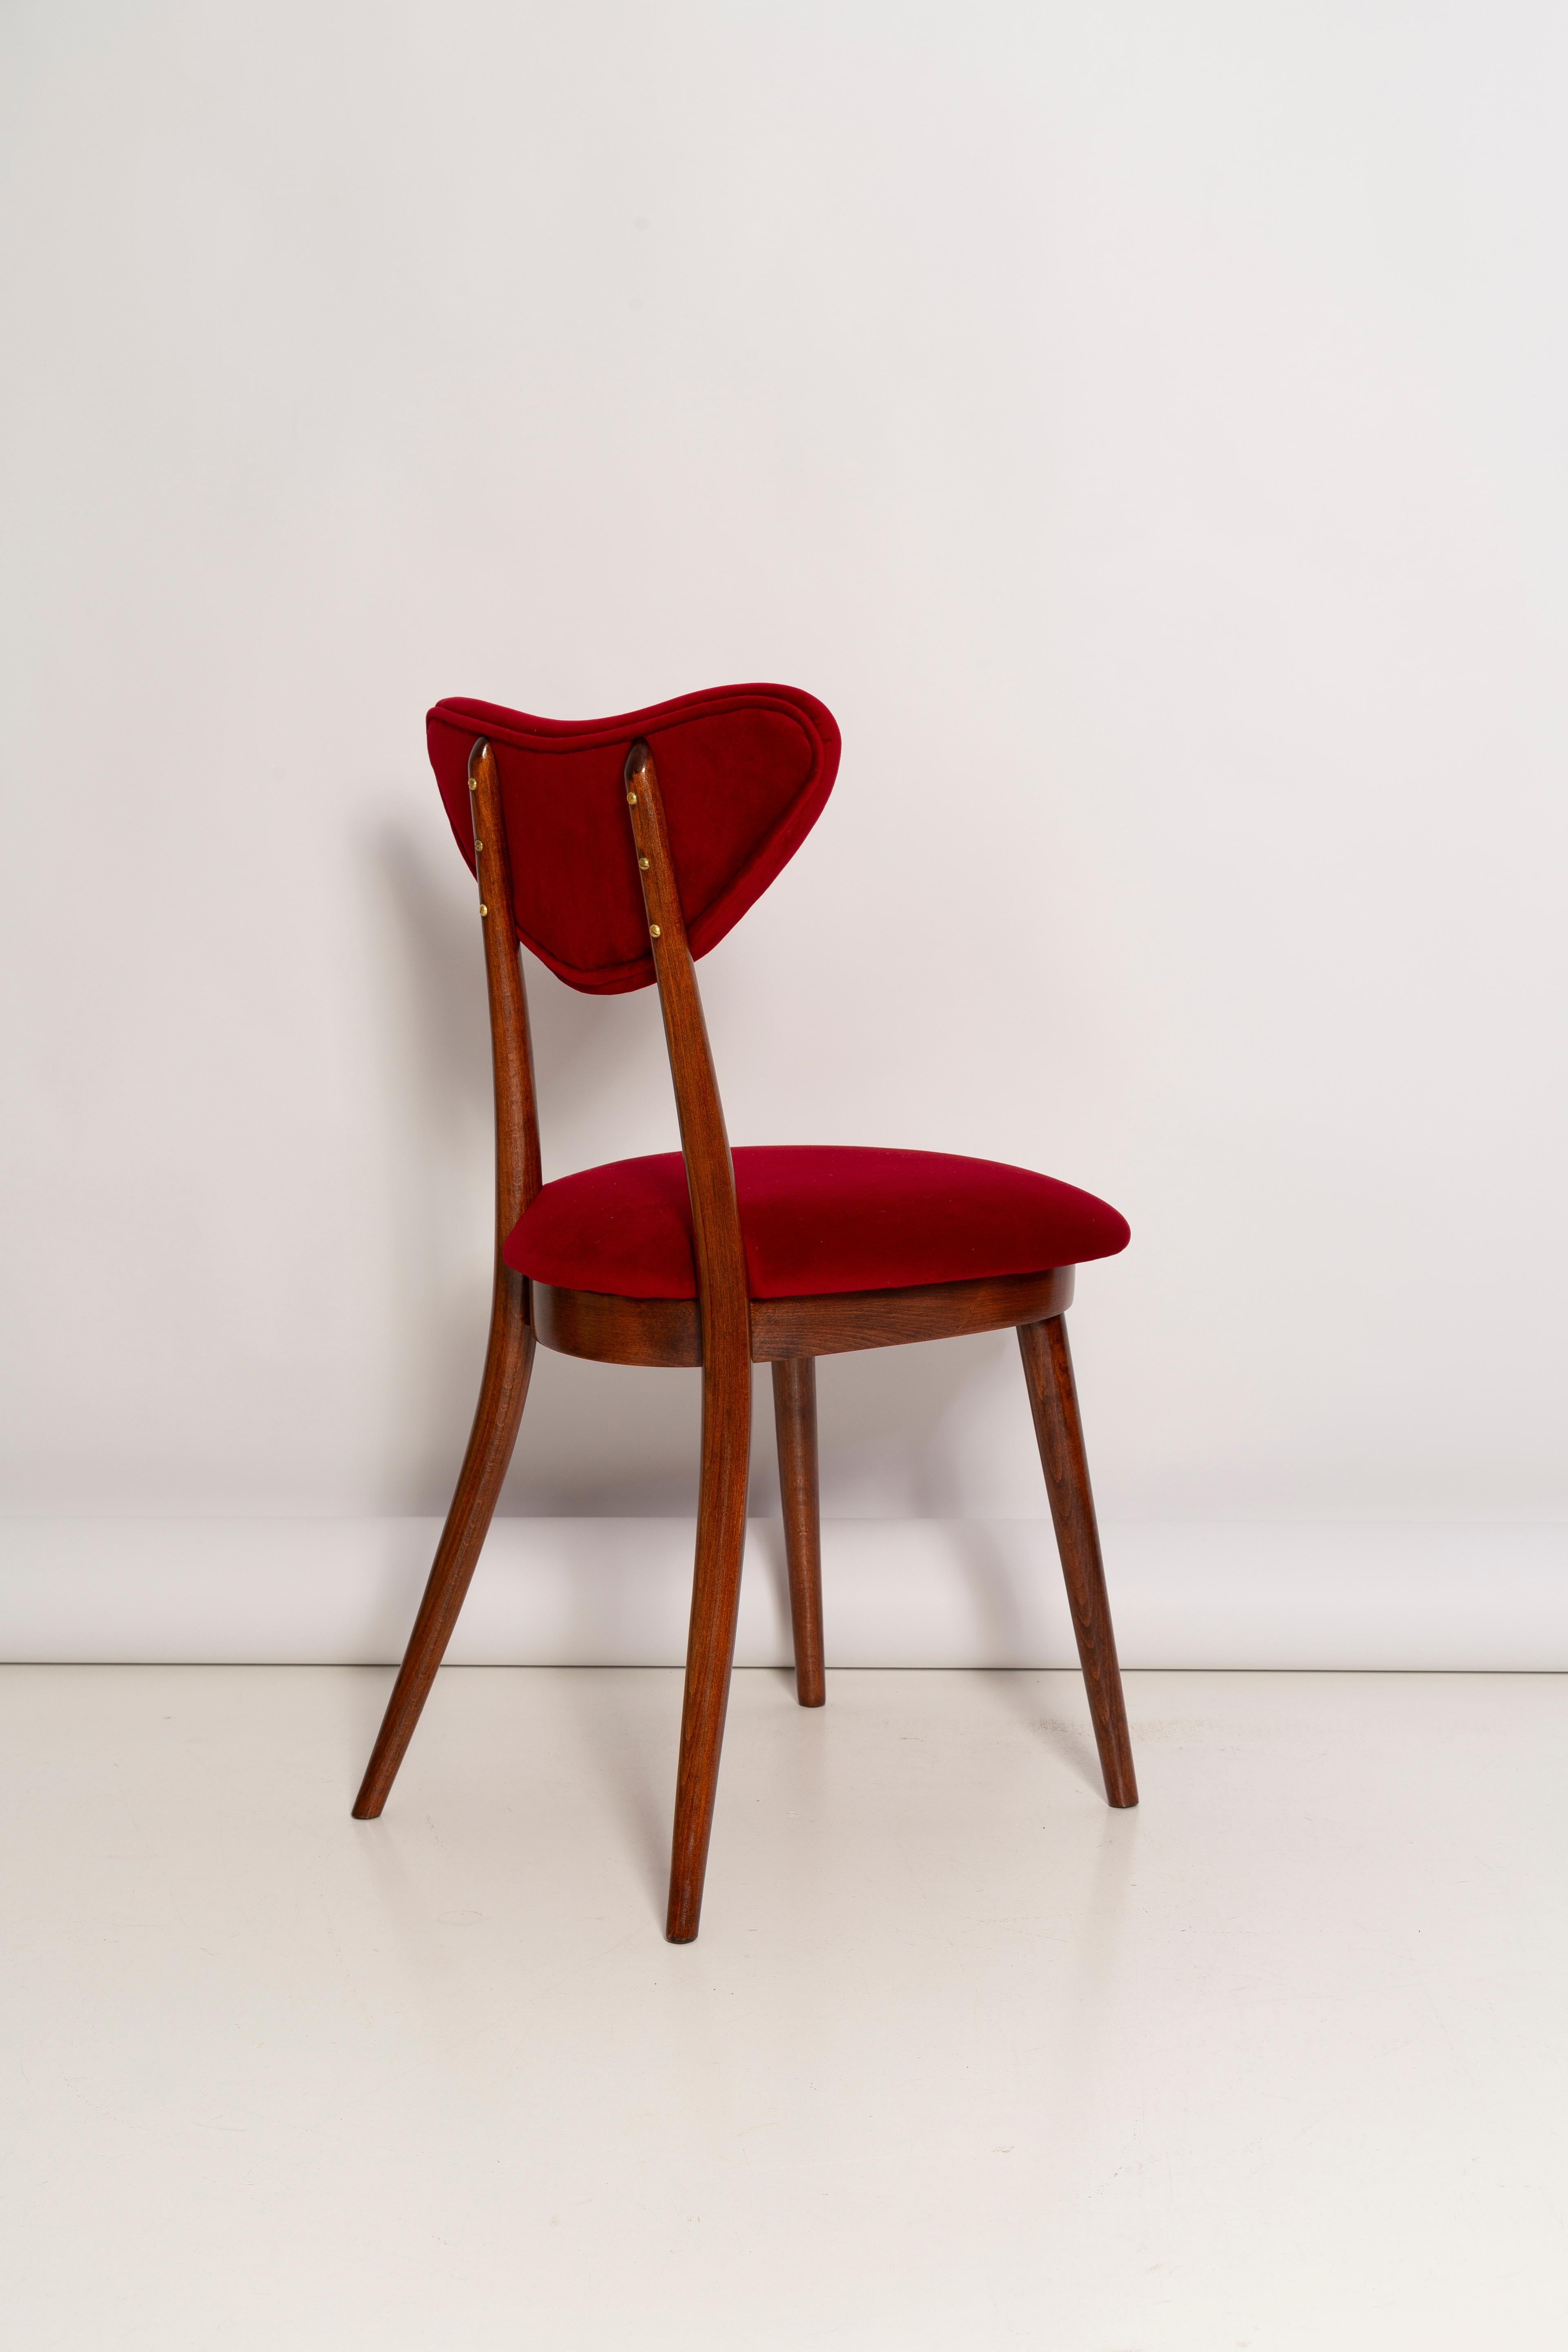 Set of Twelve Mid Century Red Heart Chairs, Poland, 1960s For Sale 2